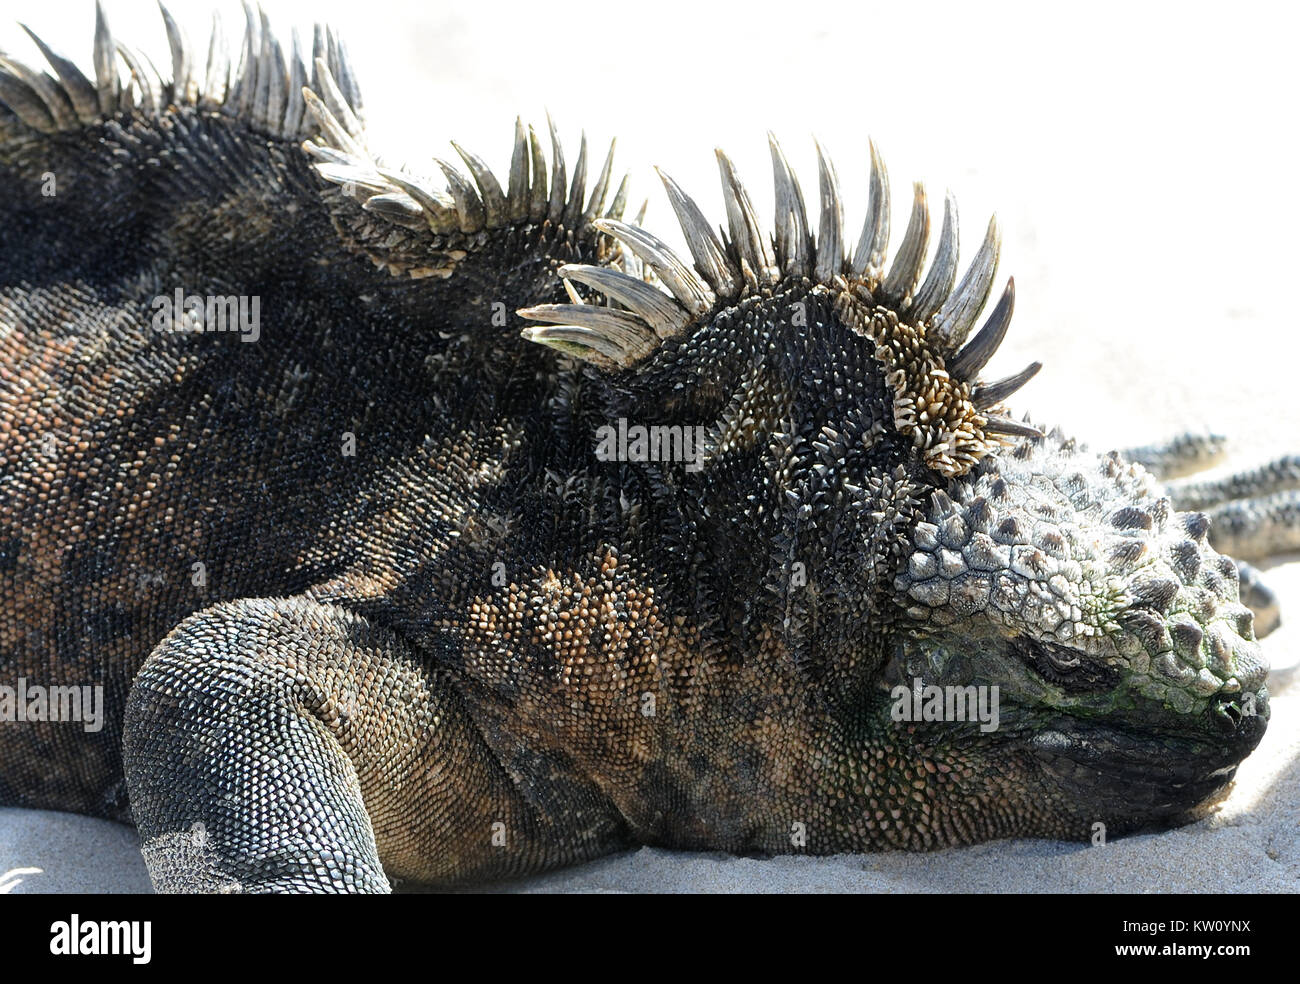 A big male marine iguana or Galápagos marine iguana (Amblyrhynchus cristatus cristatus) with a fine crest and spines. This subspecies is endemic to Is Stock Photo